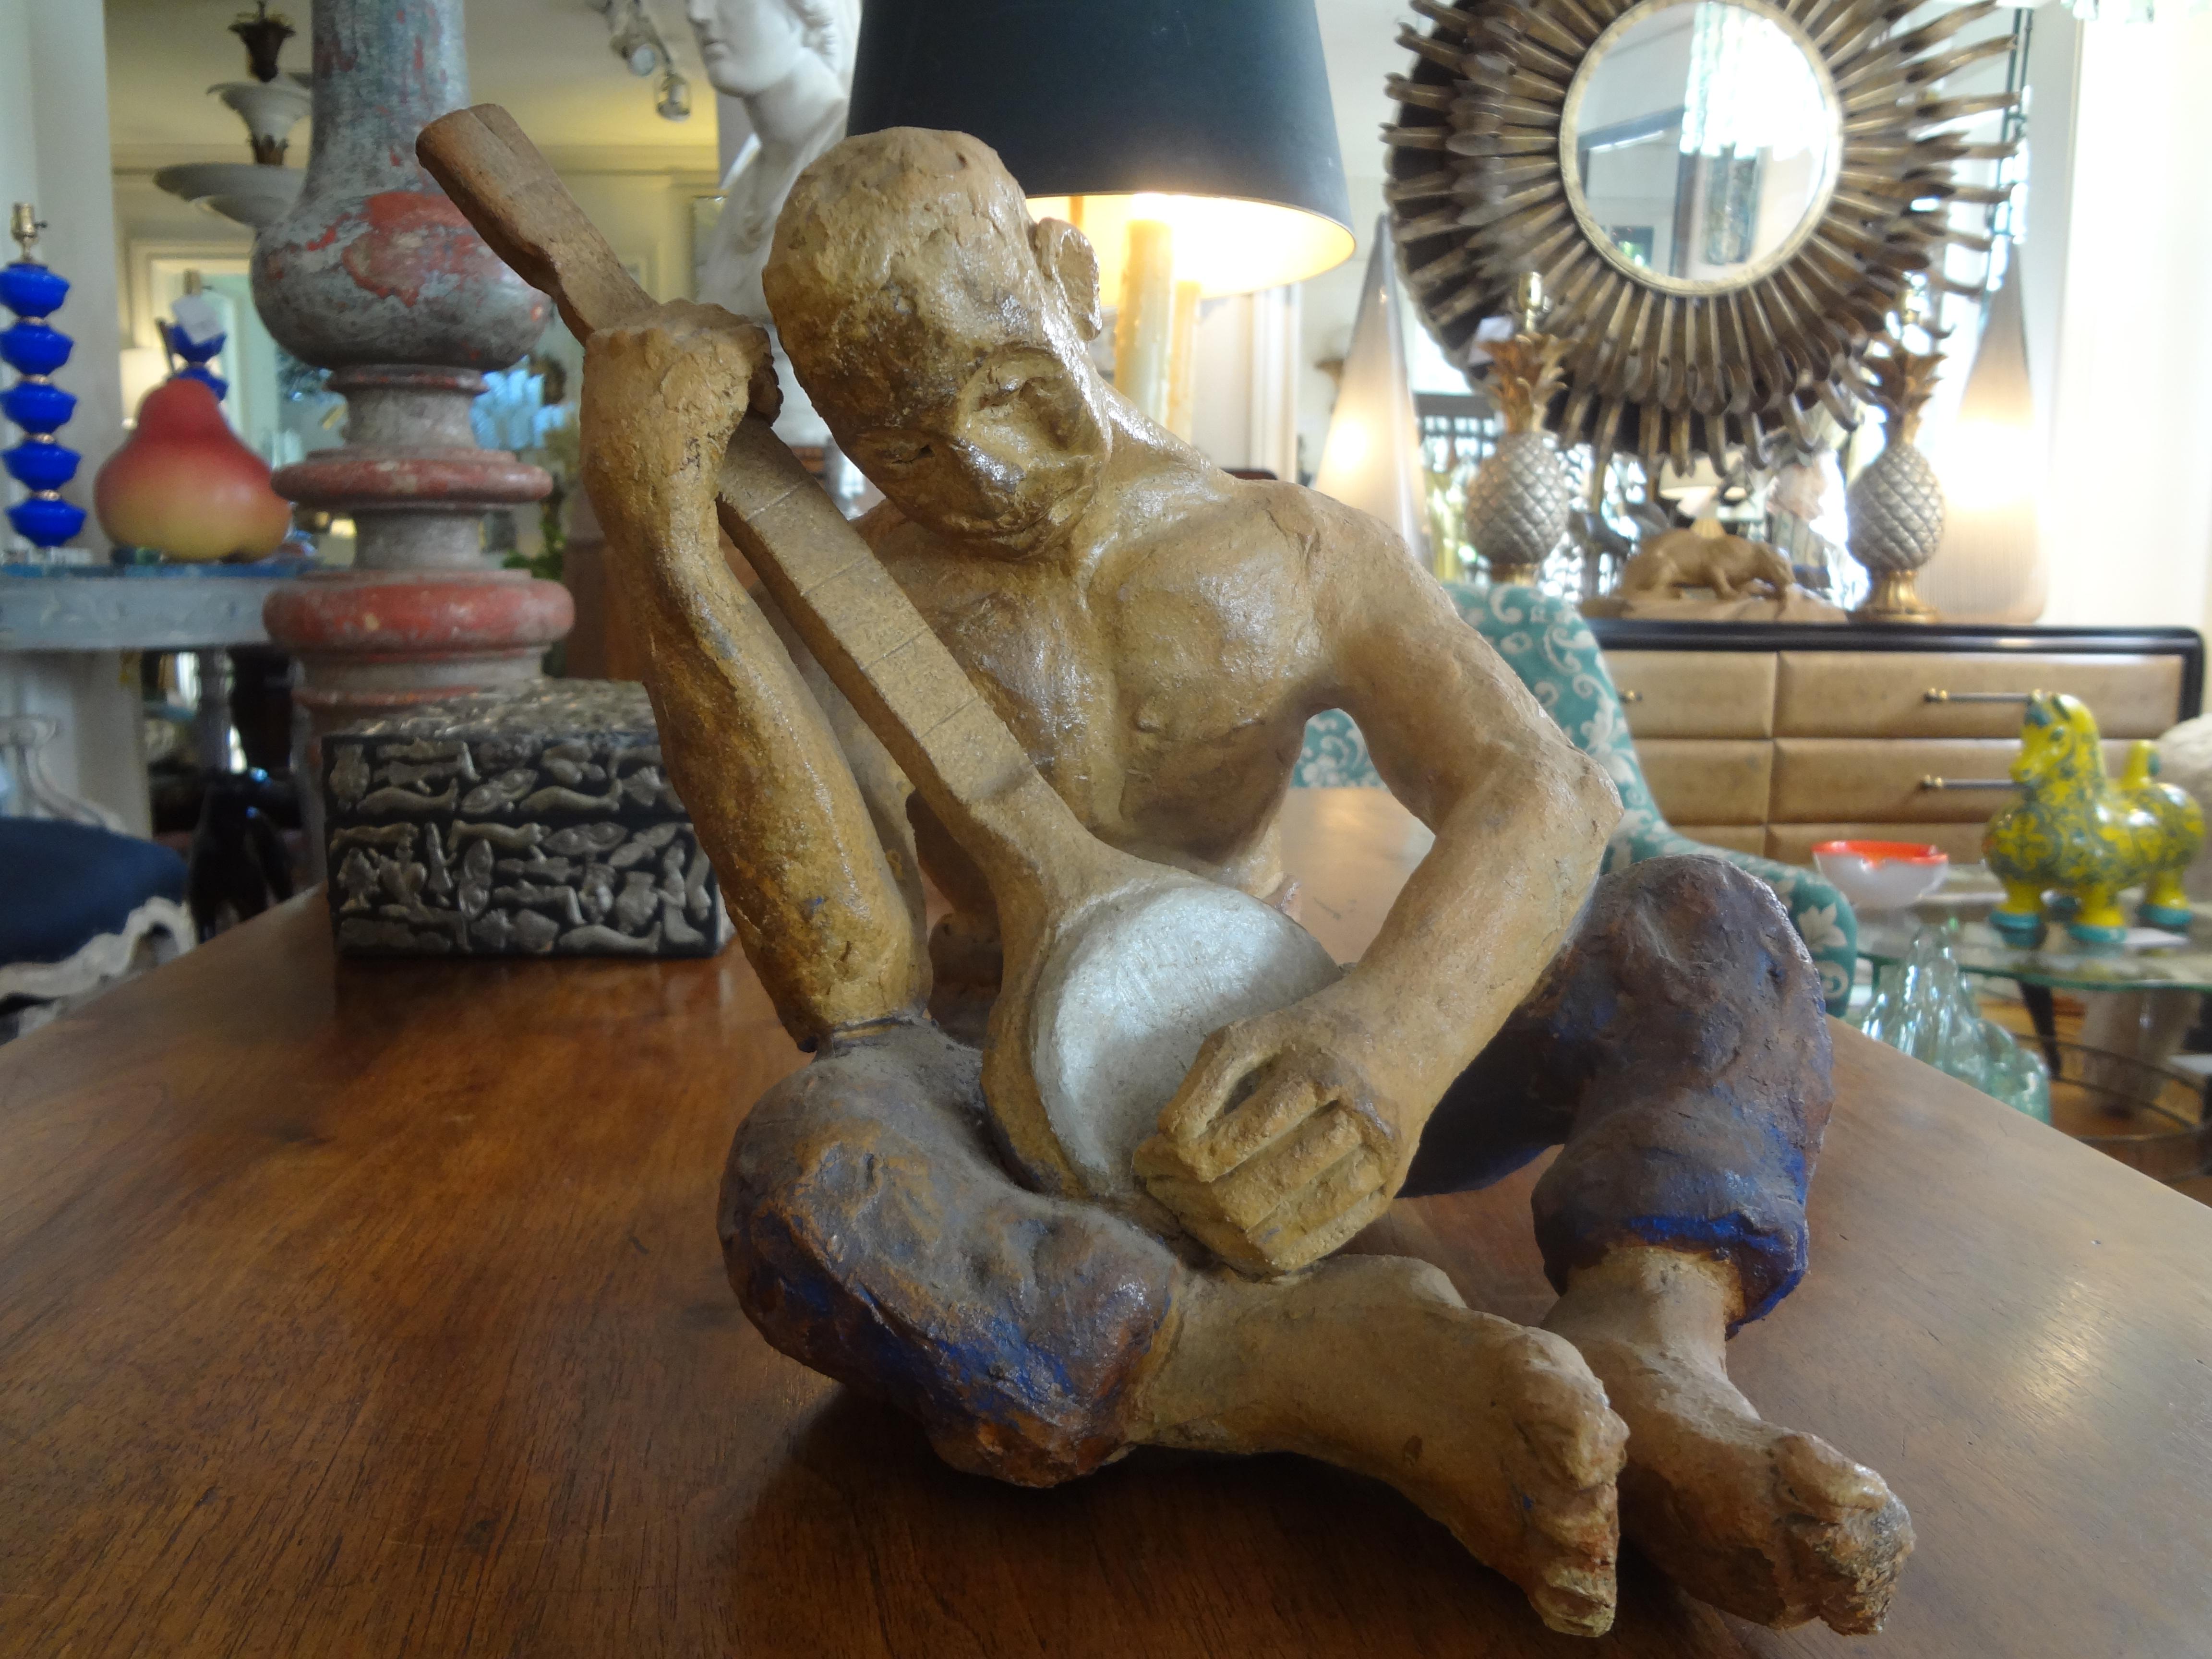 Mid-20th Century terracotta or clay figural sculpture. This vintage terra cotta sculpture depicts a man seated playing a musical instrument.